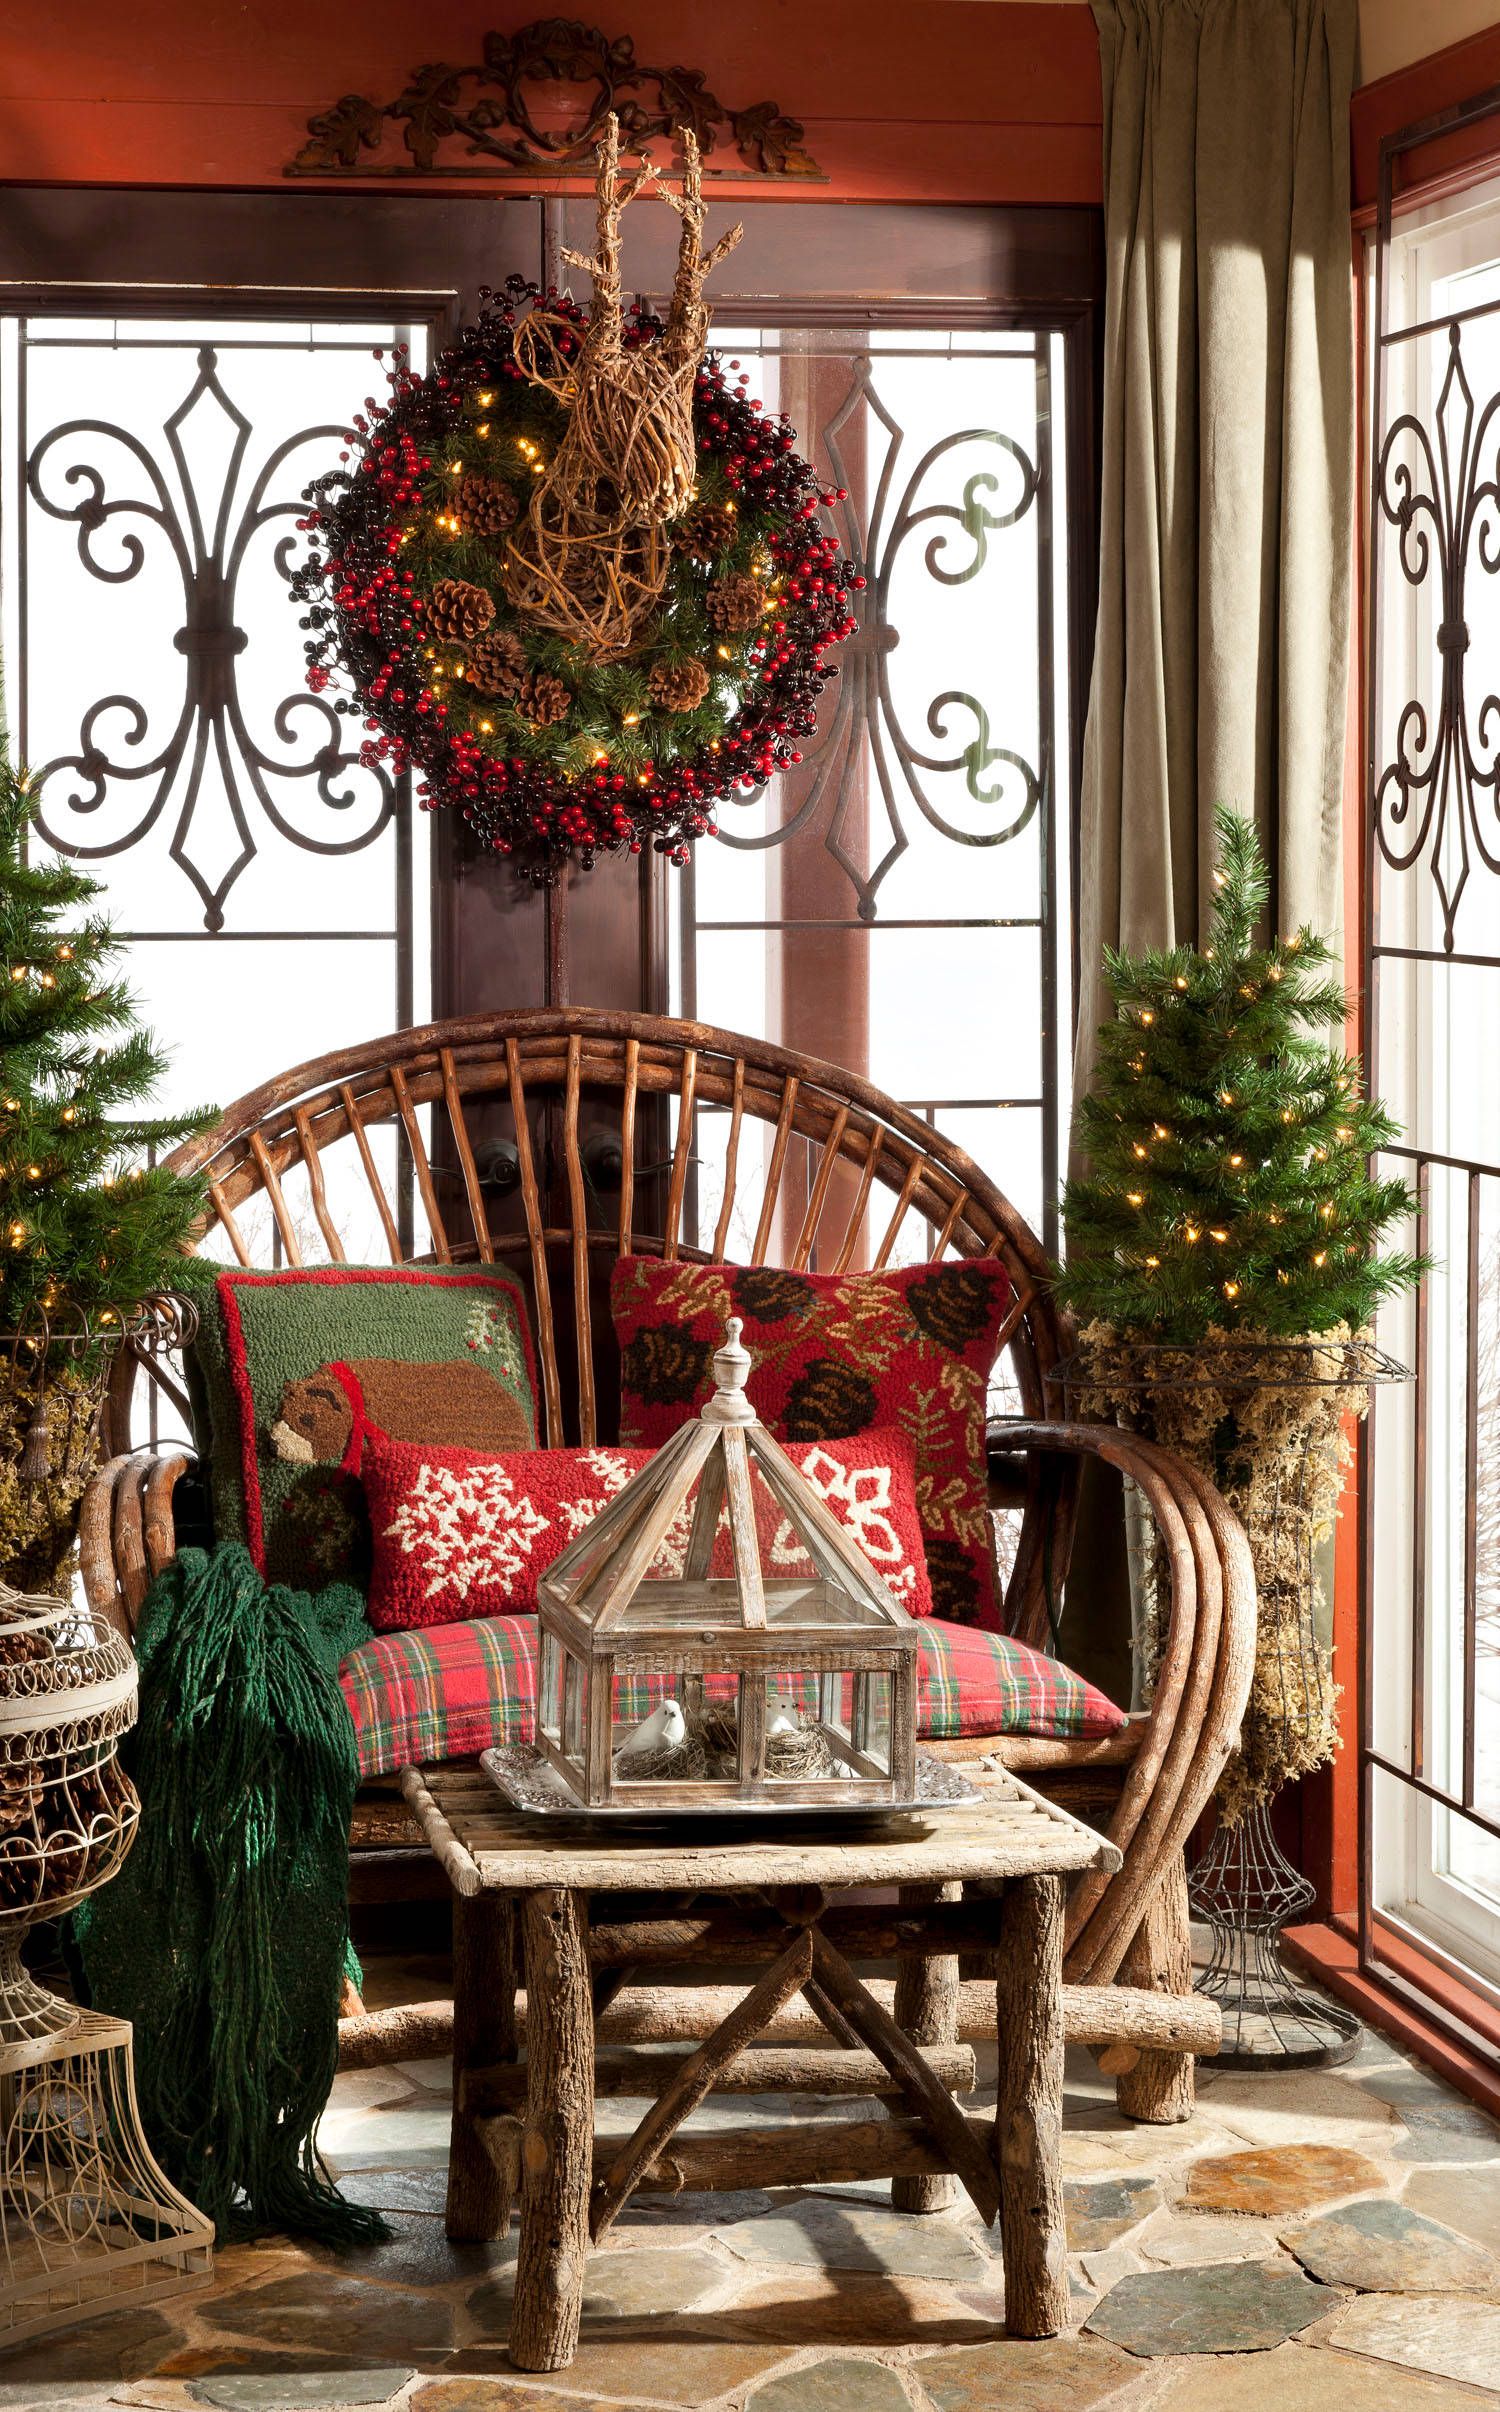 Decorating-the-covered-from-porch-with-rustic-style-for-the-Holidays